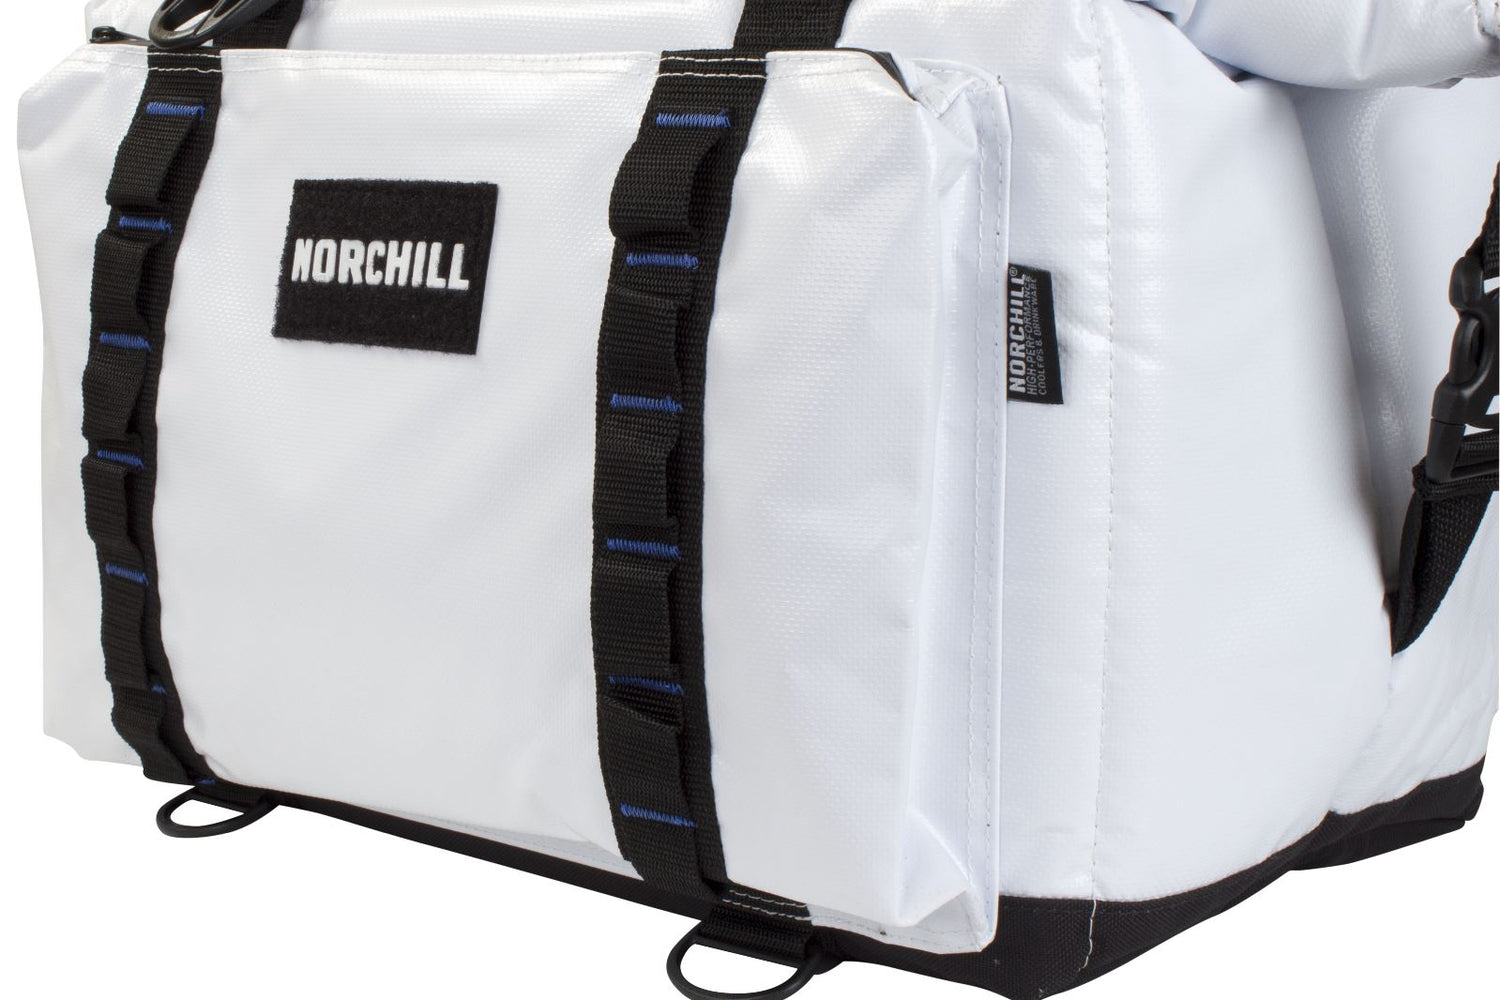 BoatBag™ xTreme Cooler Bag - NorChill® Coolers & Drinkware